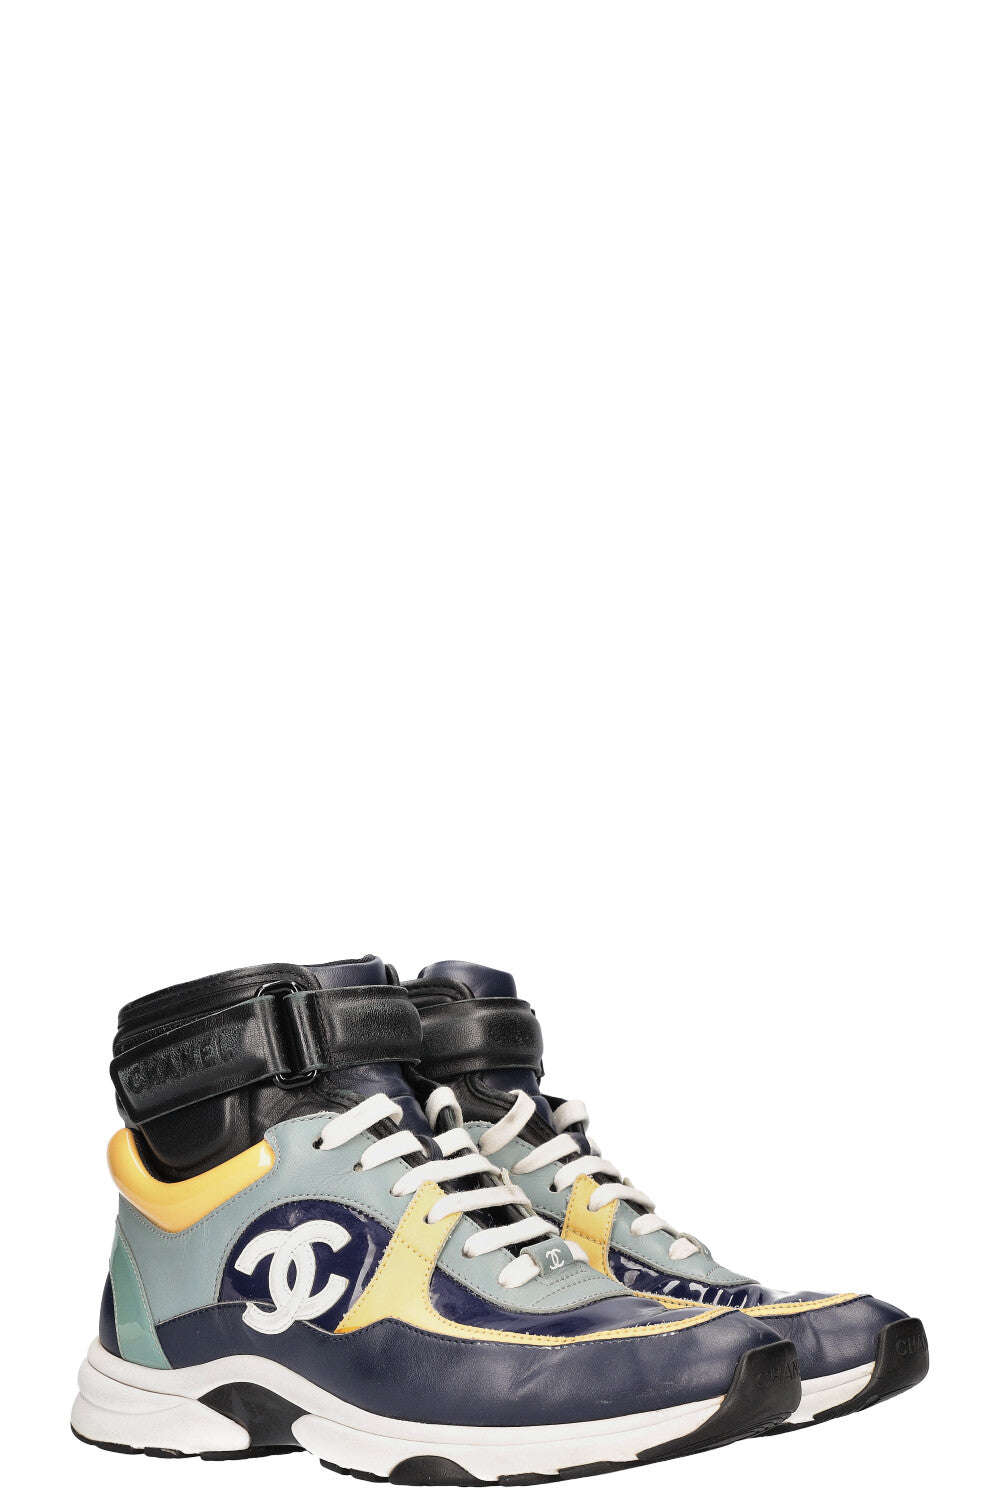 CHANEL High Top Sneakers Patent Blue 